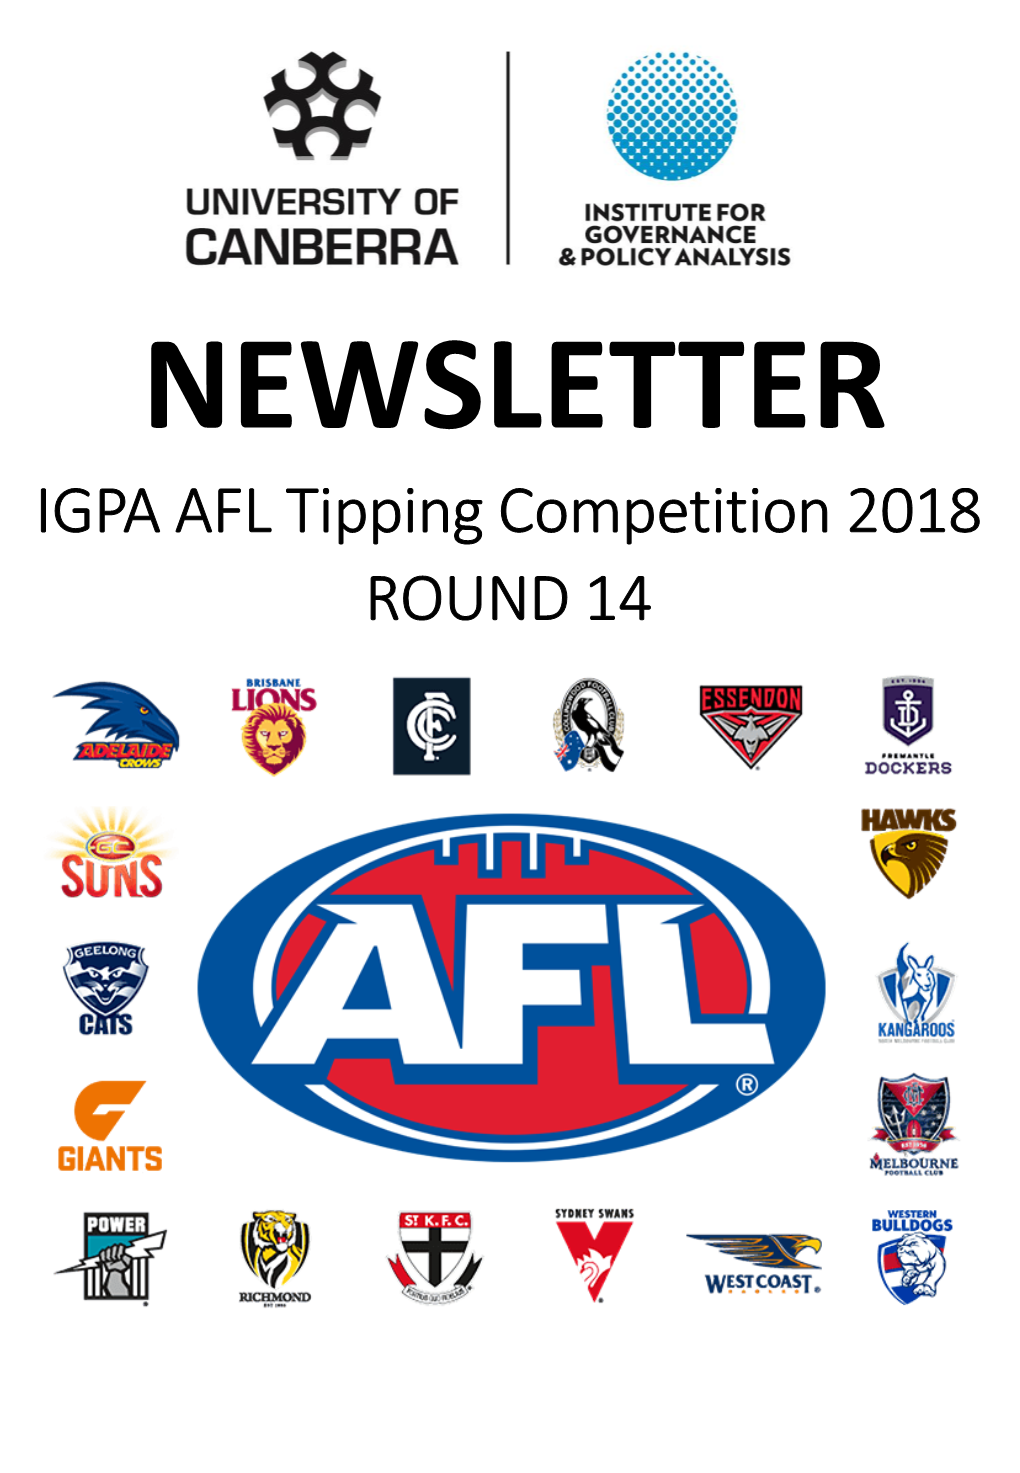 IGPA AFL Tipping Competition 2018 ROUND 14 ROUND 14